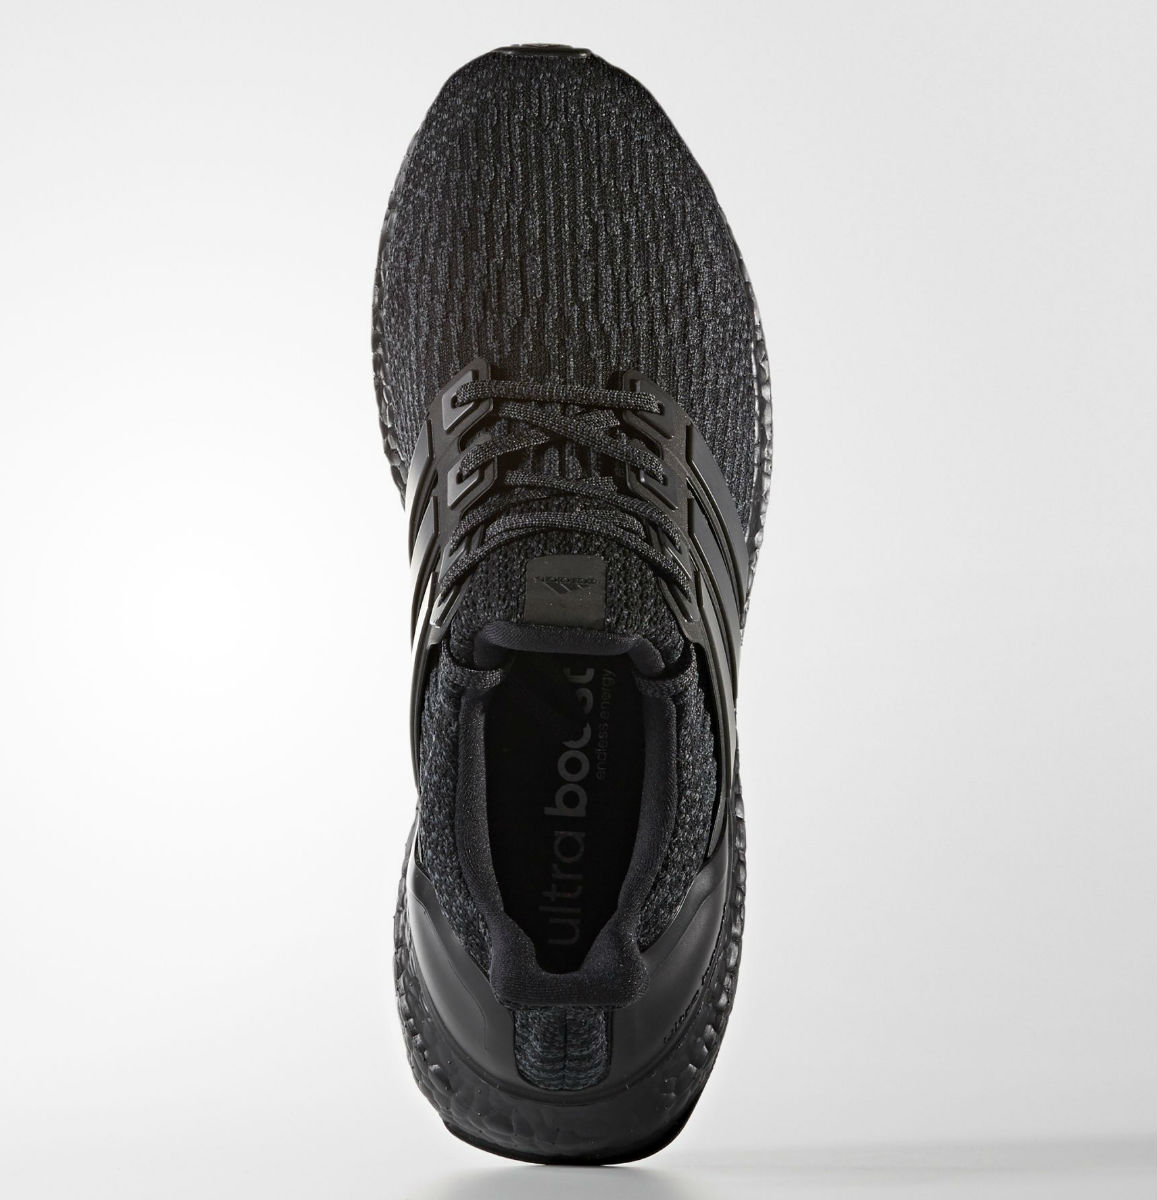 Adidas Ultra Boost 3.0 textured black leather enclosure and